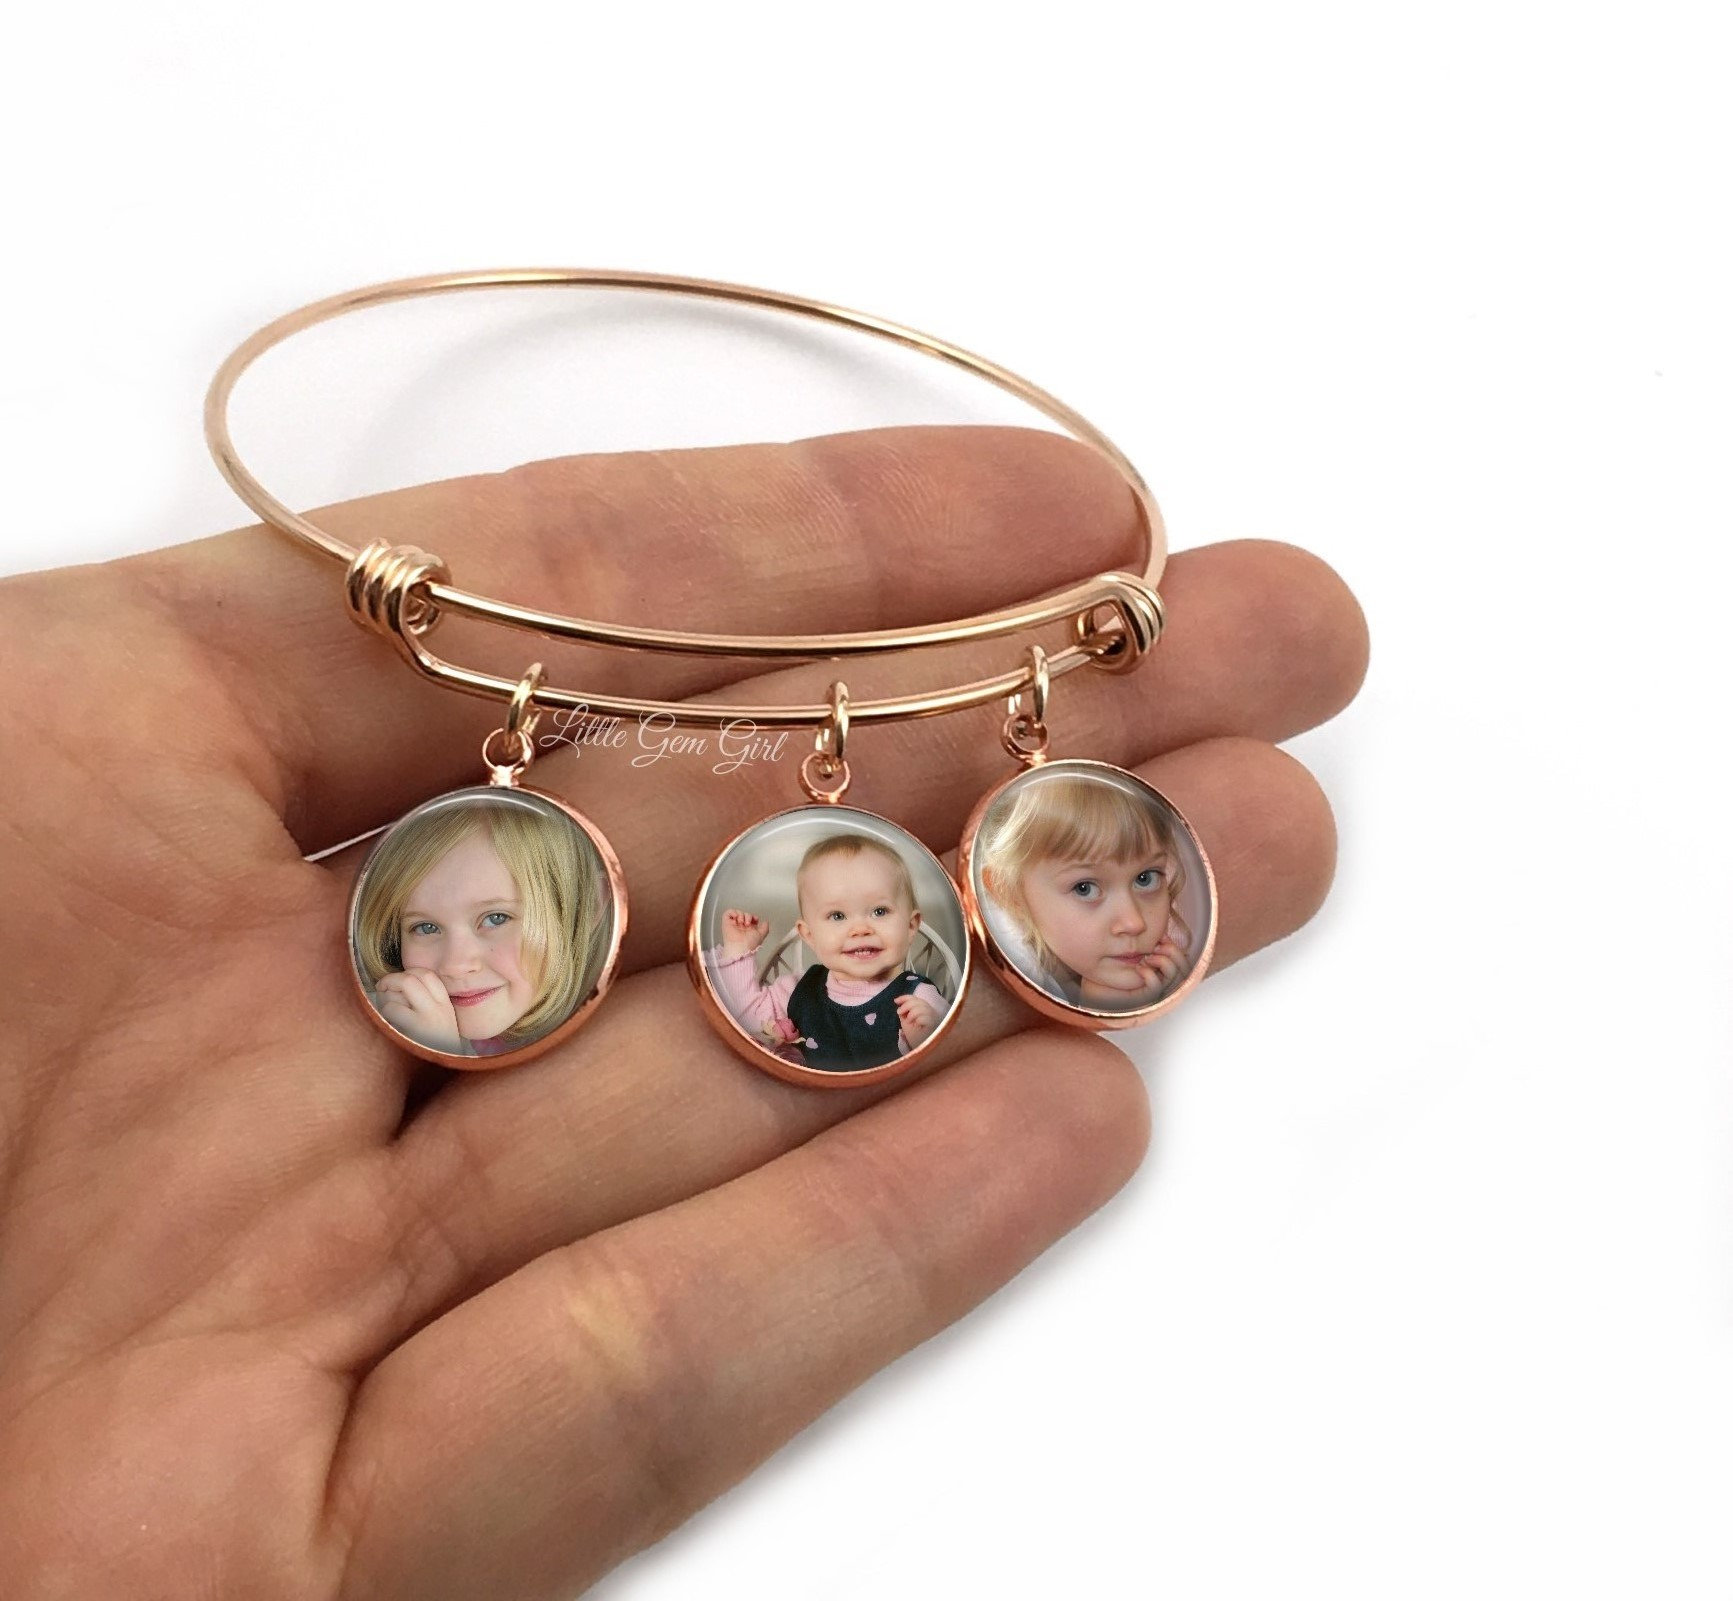  gors Personalized photo bracelets custom picture